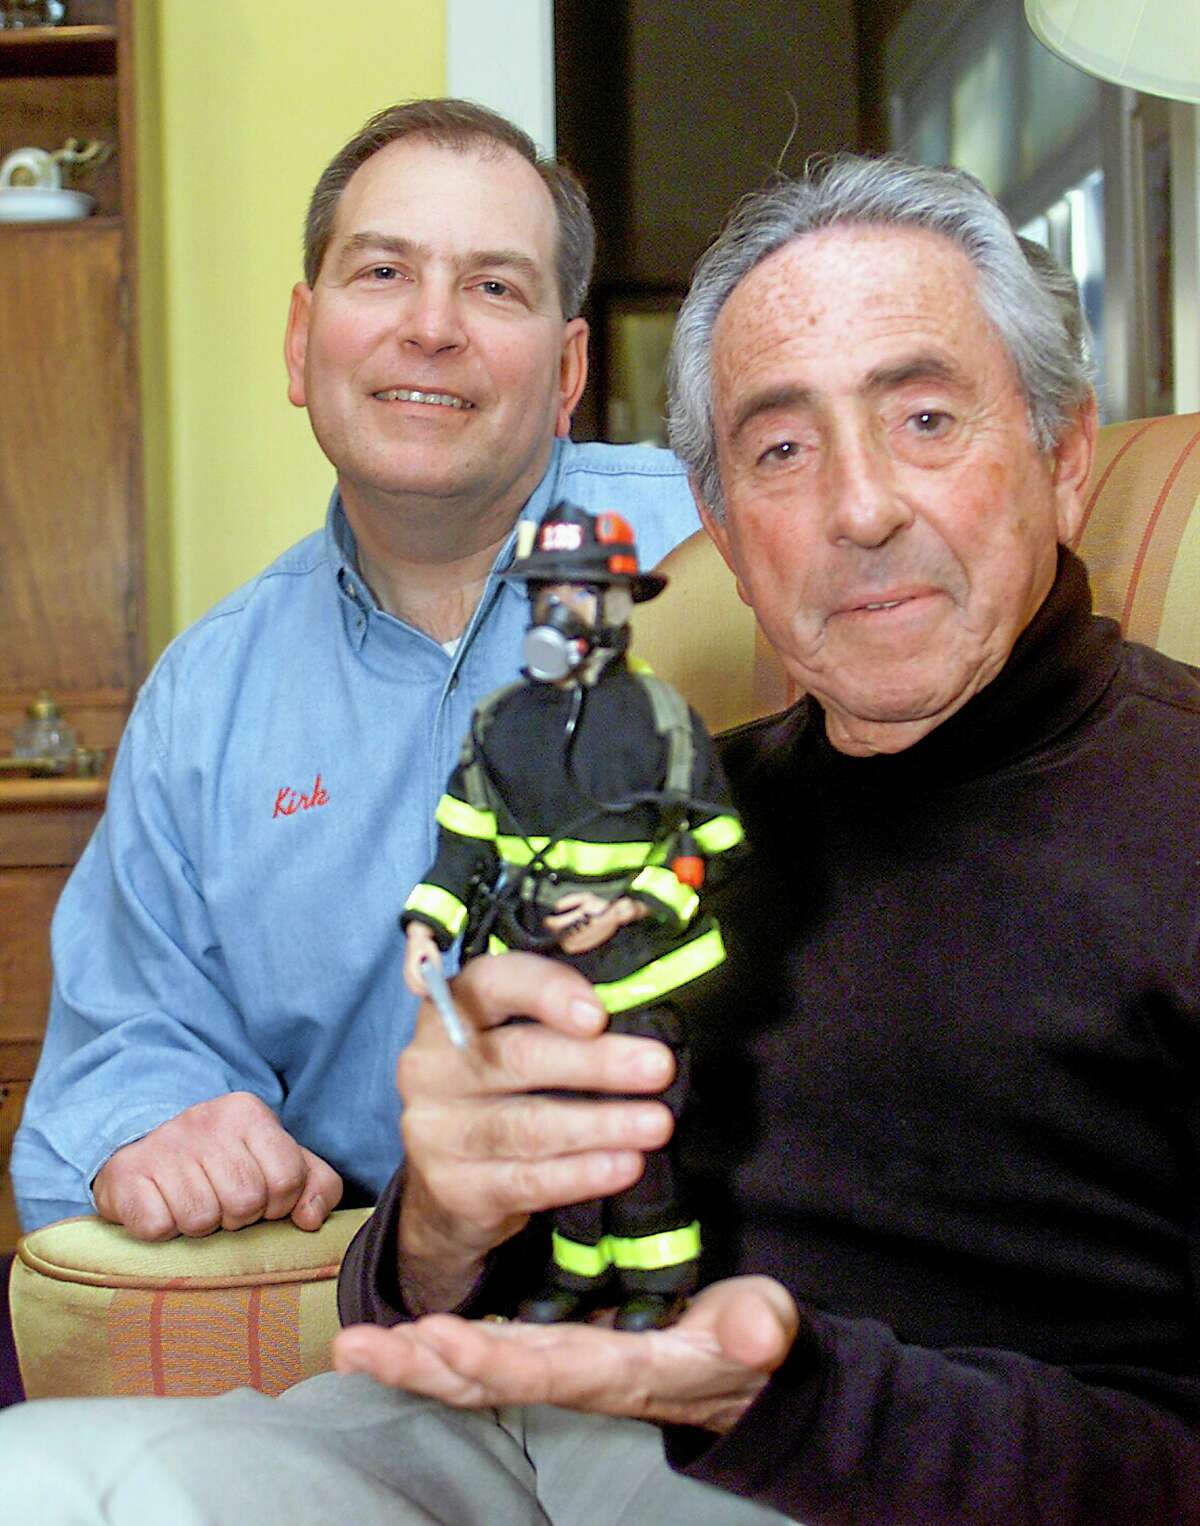 FILE - In this Dec. 7, 2001 file photo, Kirk Bozigian, left, and Don Levine, co-founders of Real Heroes Inc., show one of their collectible designs, a New York City firefighter, in Levine's home in Providence, R.I. Levine, the Hasbro executive credited as the father of G.I. Joe for developing the world's first action figure, died of cancer early Thursday, May 22, 2014, at Home & Hospice Care of Rhode Island, said his wife, Nan. He was 86. (AP Photo/Stew Milne, File)